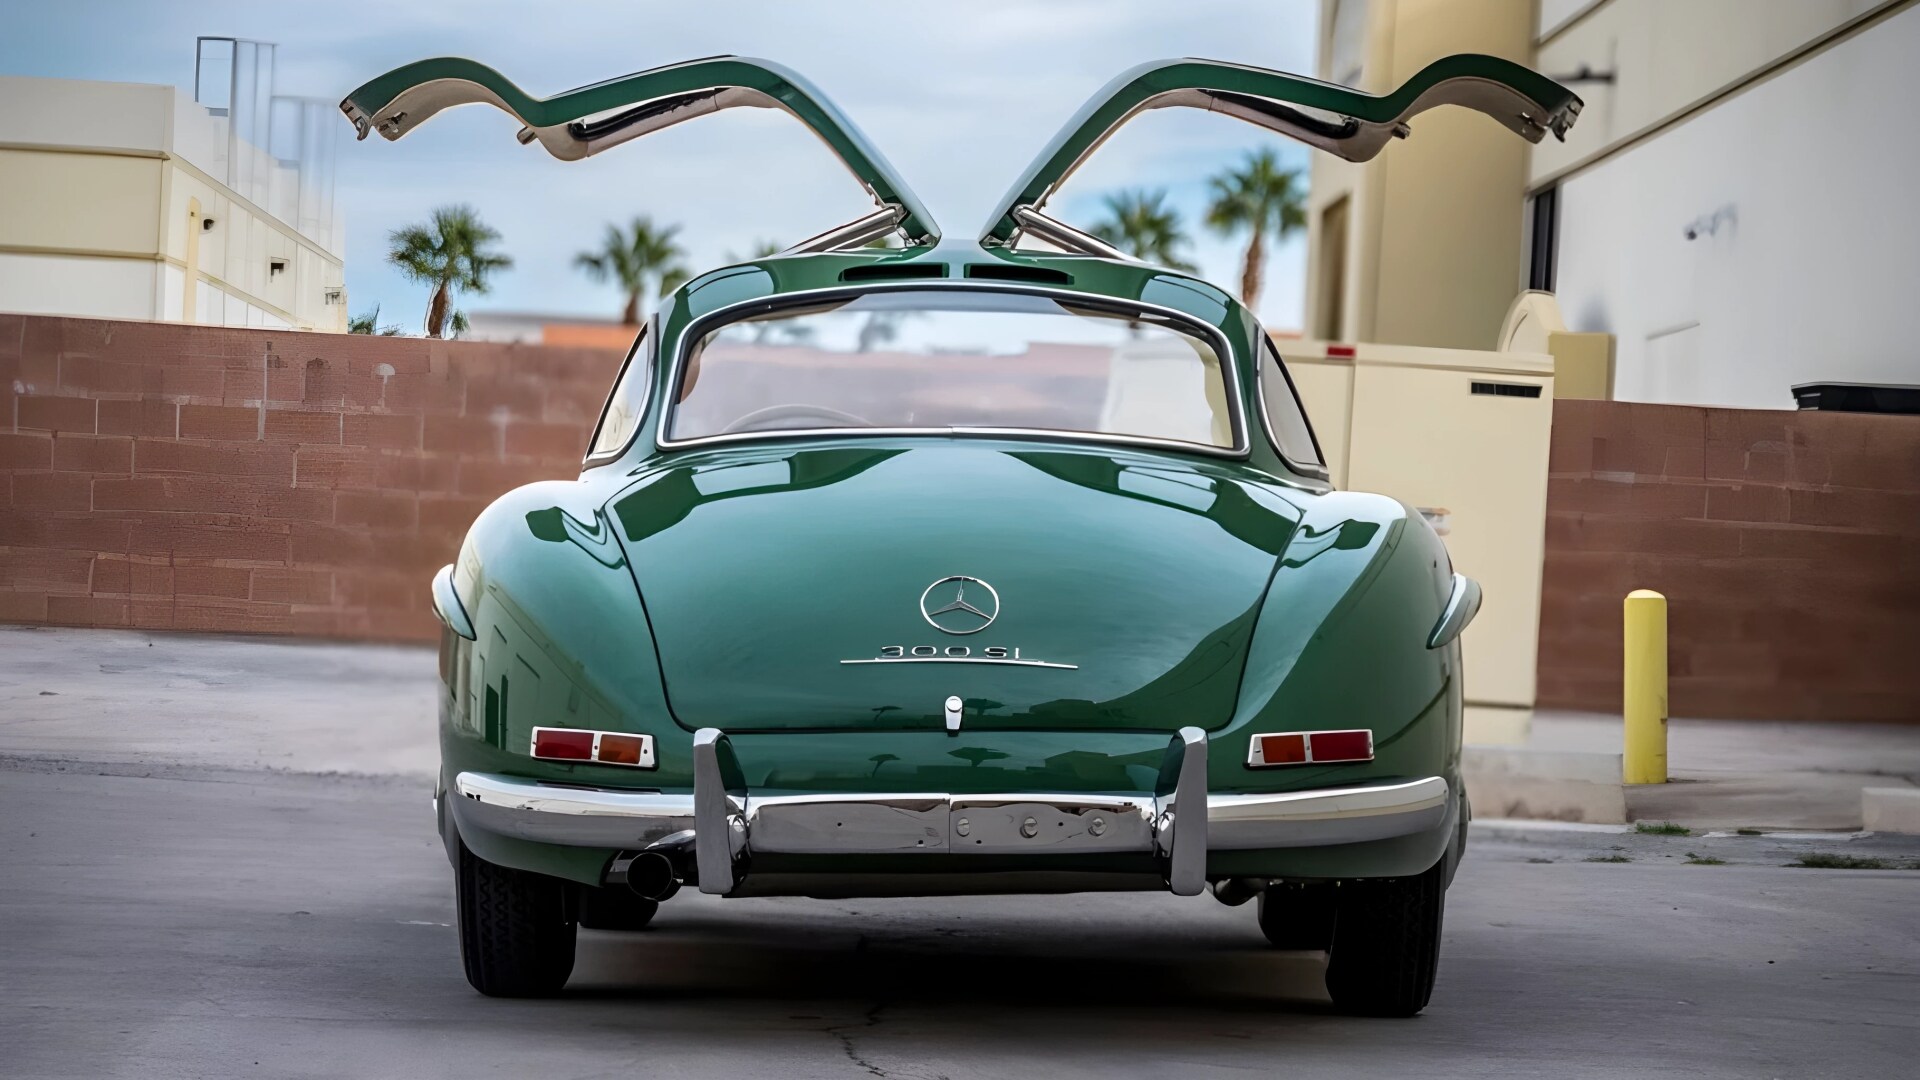 The Rear Profile Of The 1955 Mercedes-Benz 300SL Gullwing